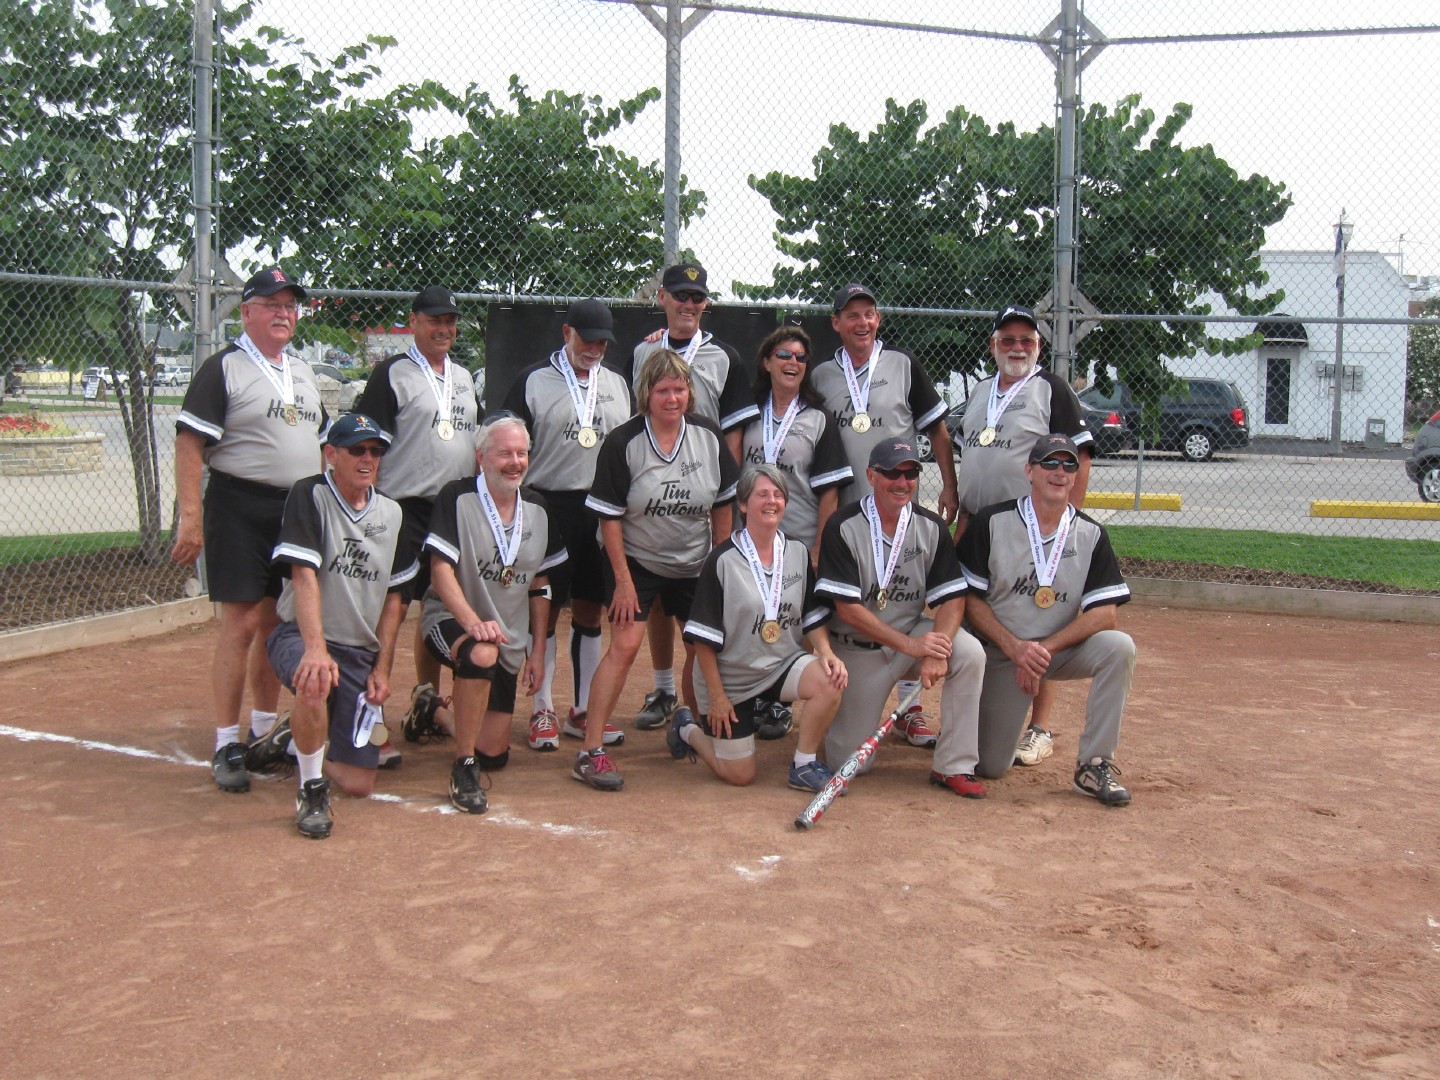 [Mississauga Slo-pitch Team, Ontario 55+ Summer Games 2014 Gold Medal Champions]